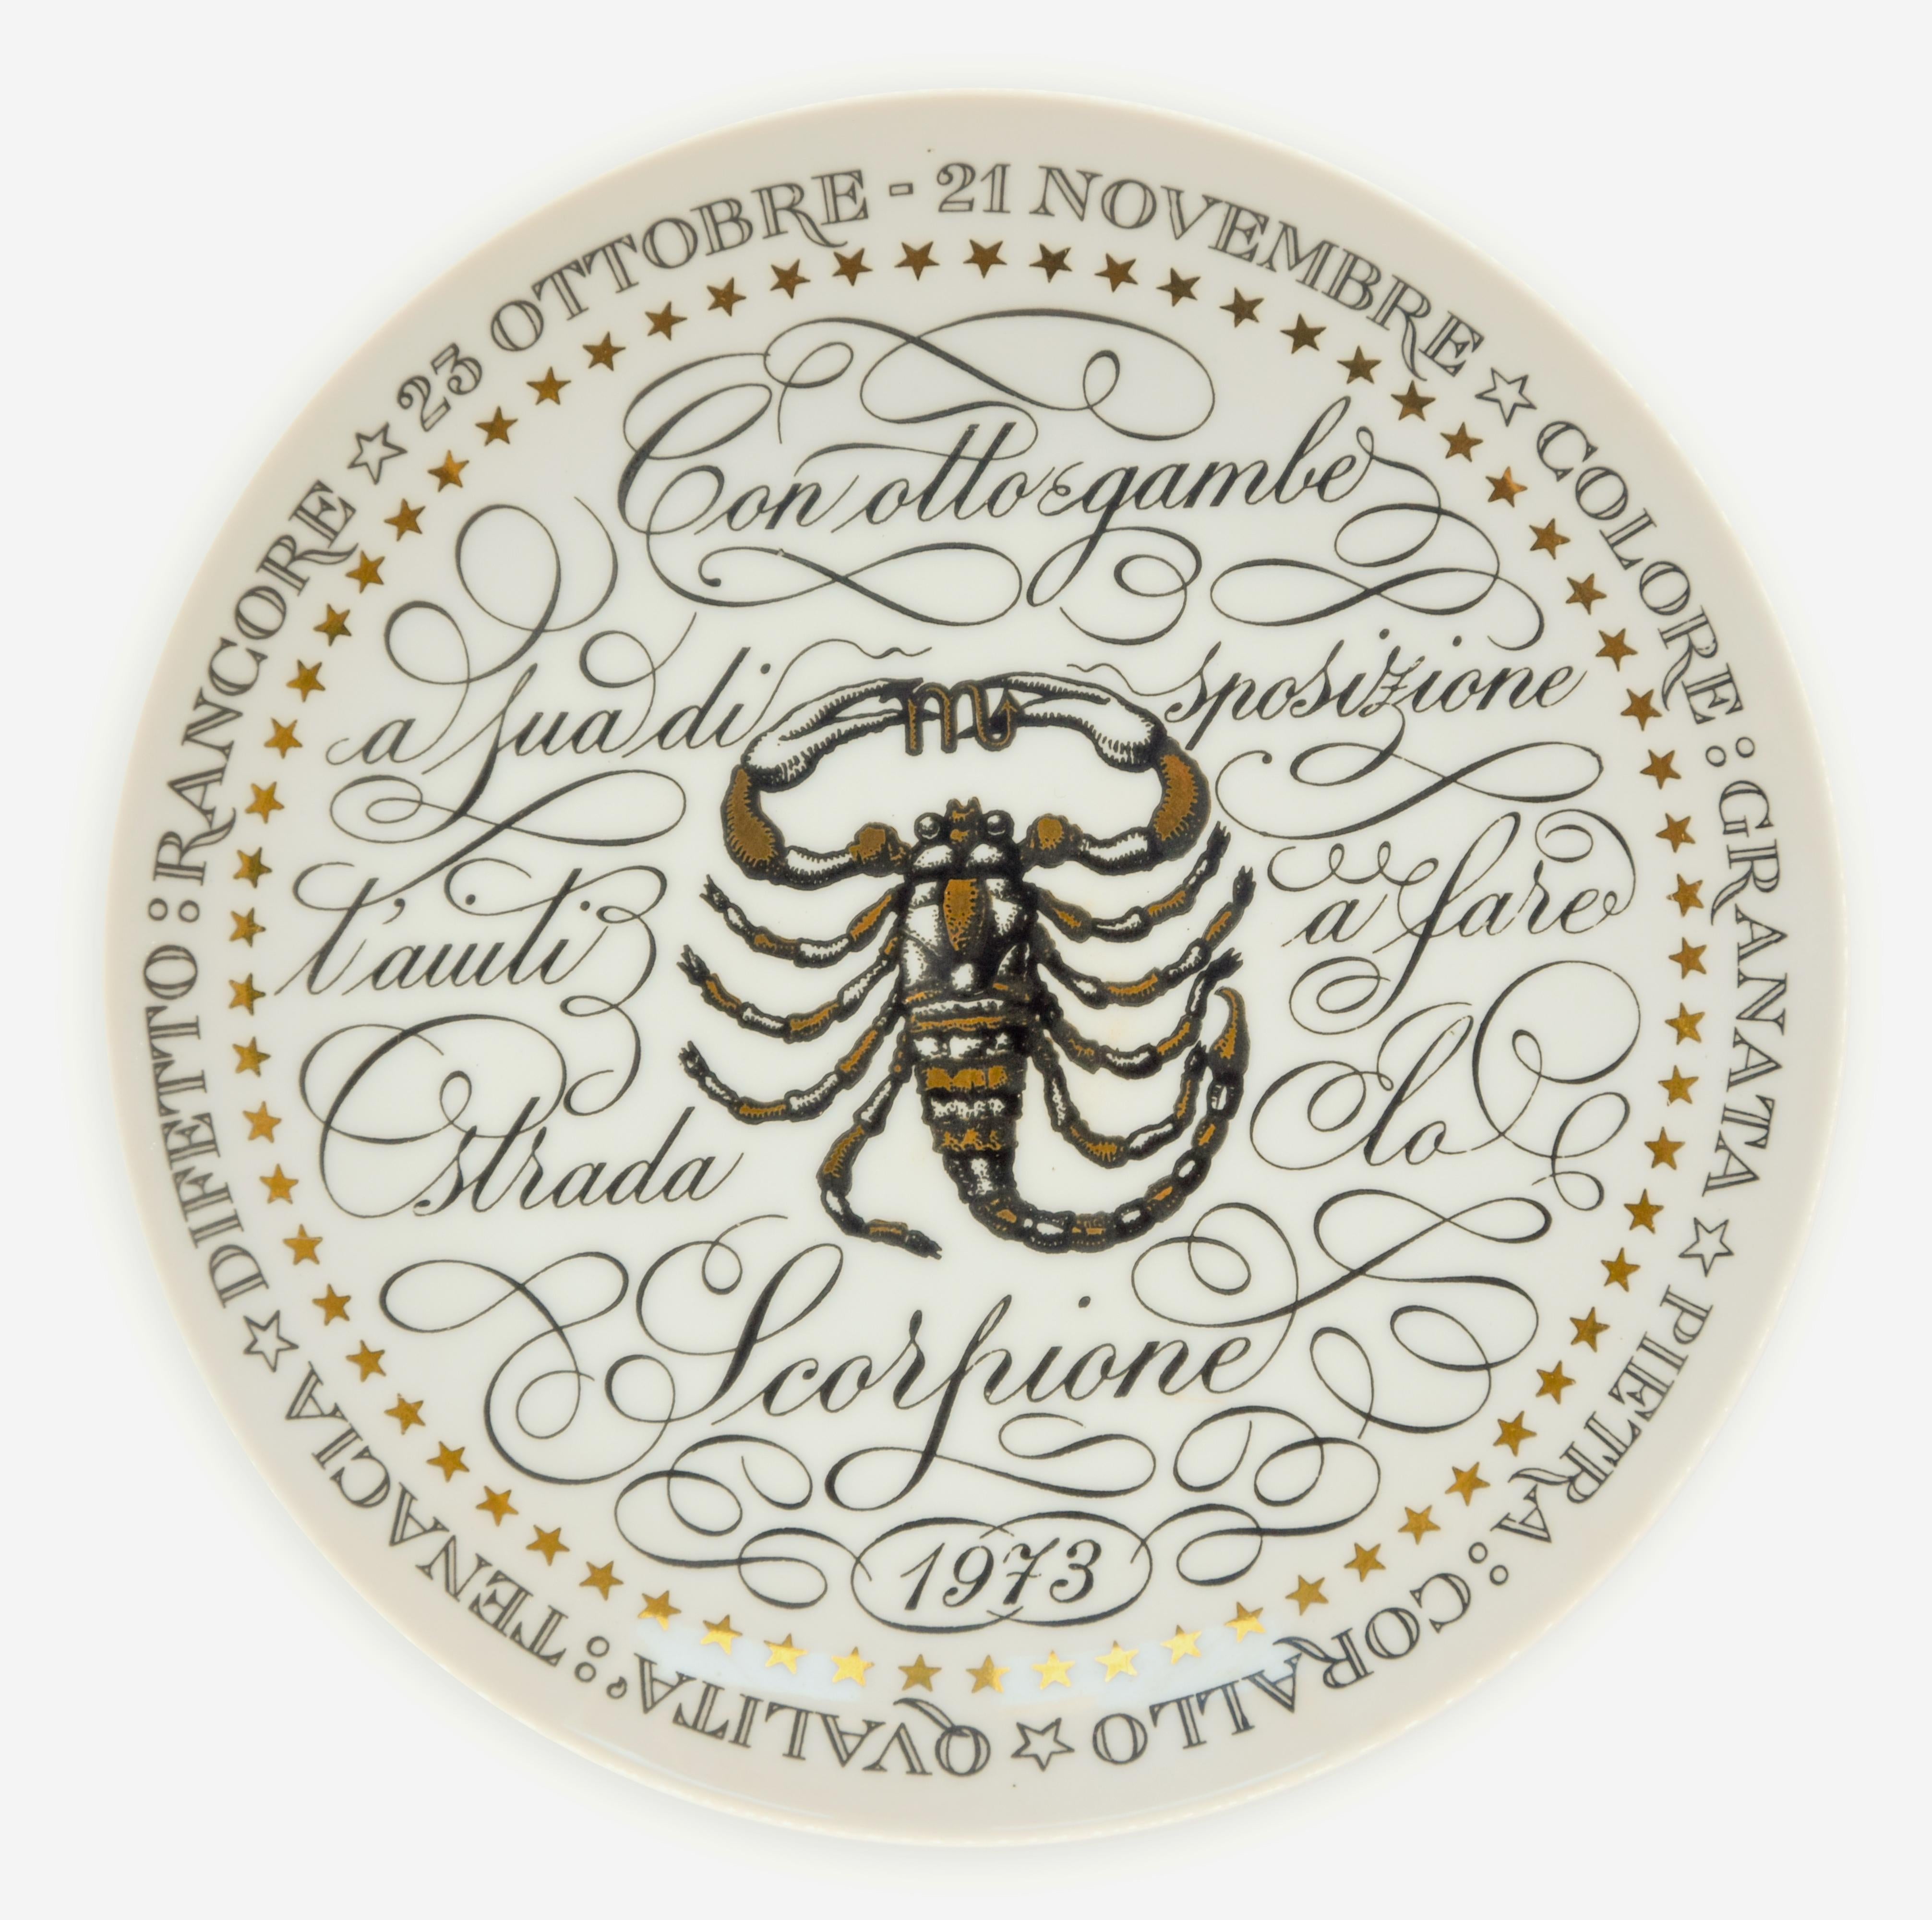 Mid-20th Century Water Signs, Set of 3 Plates from Zodiac Plate Series by P. Fornasetti, 1965